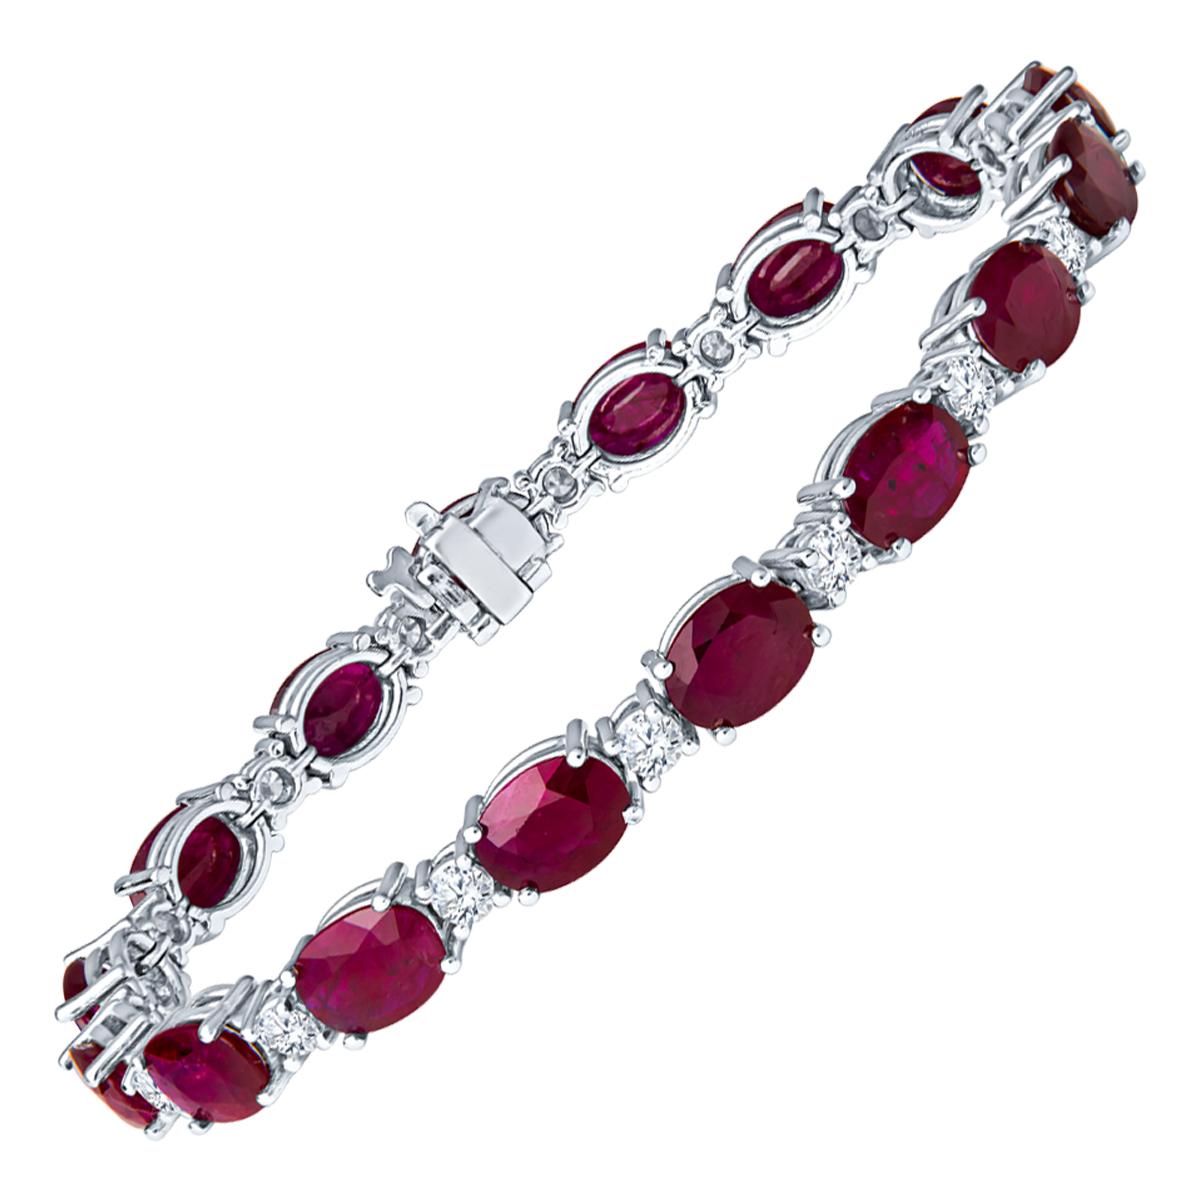 23.27 Carat Oval Ruby and 2.04ct Round Diamond 14kt White Gold Tennis Bracelet